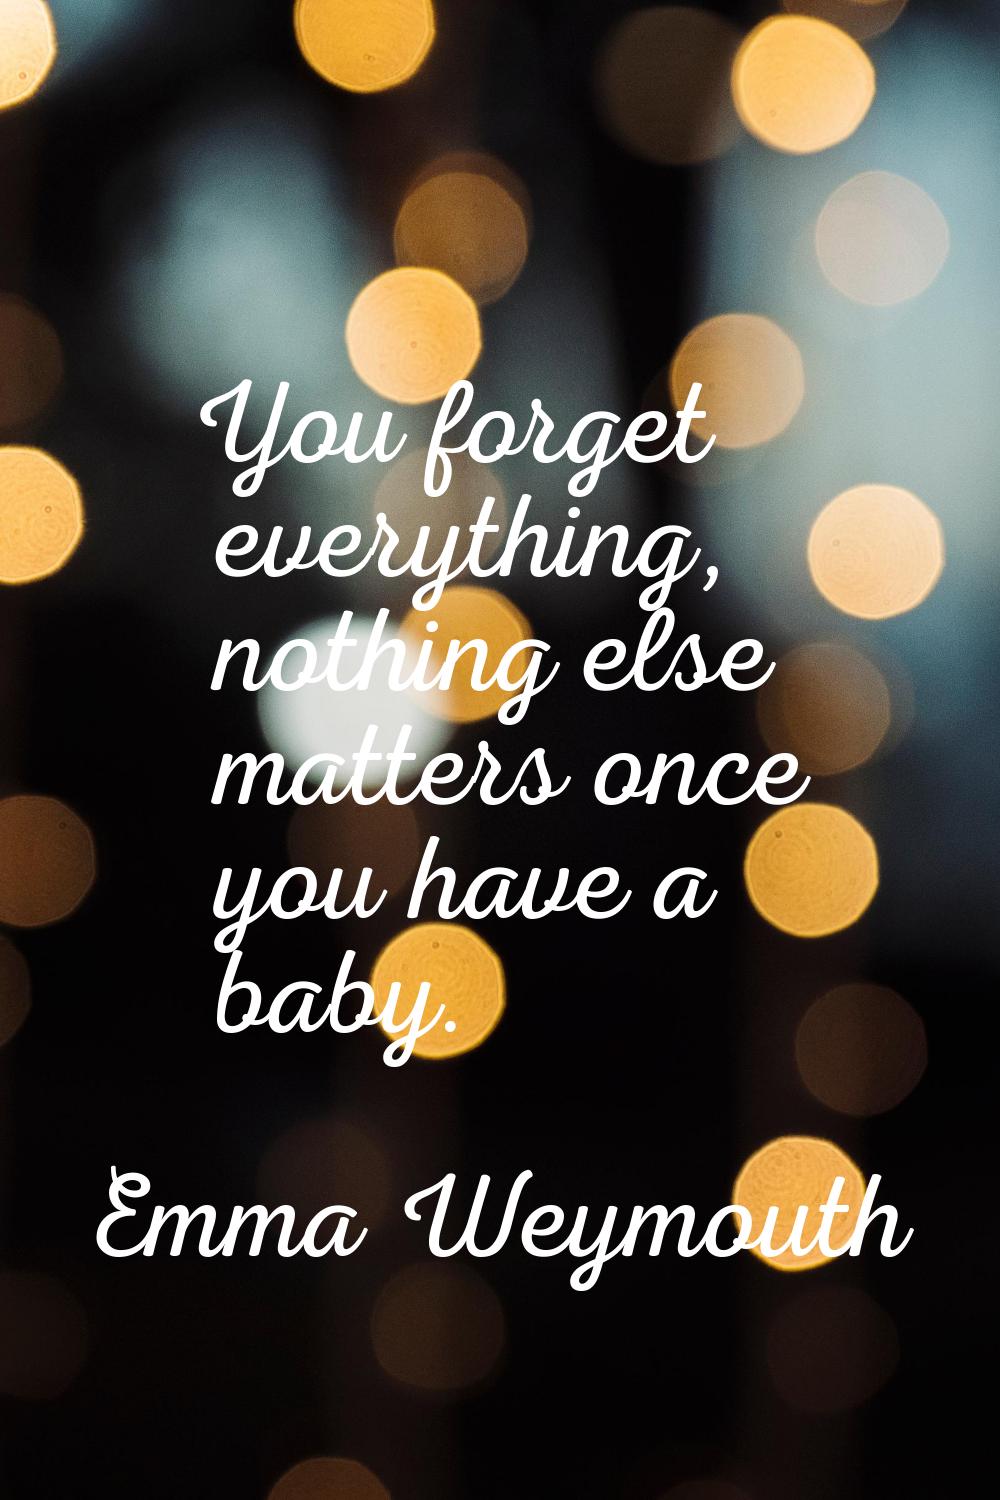 You forget everything, nothing else matters once you have a baby.